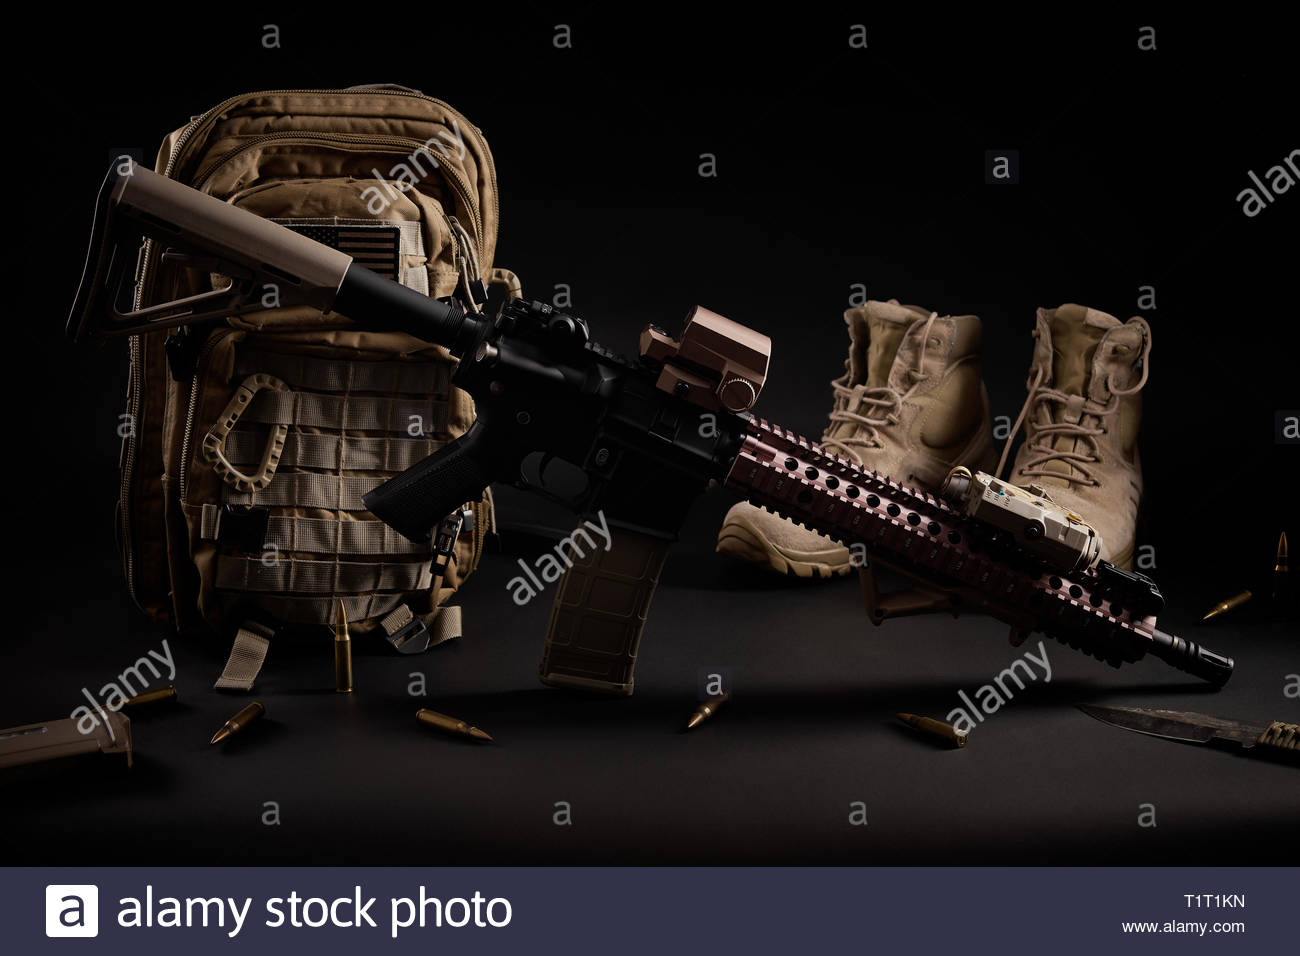 Military Wallpaper With An Assault Rifle On A Black Background